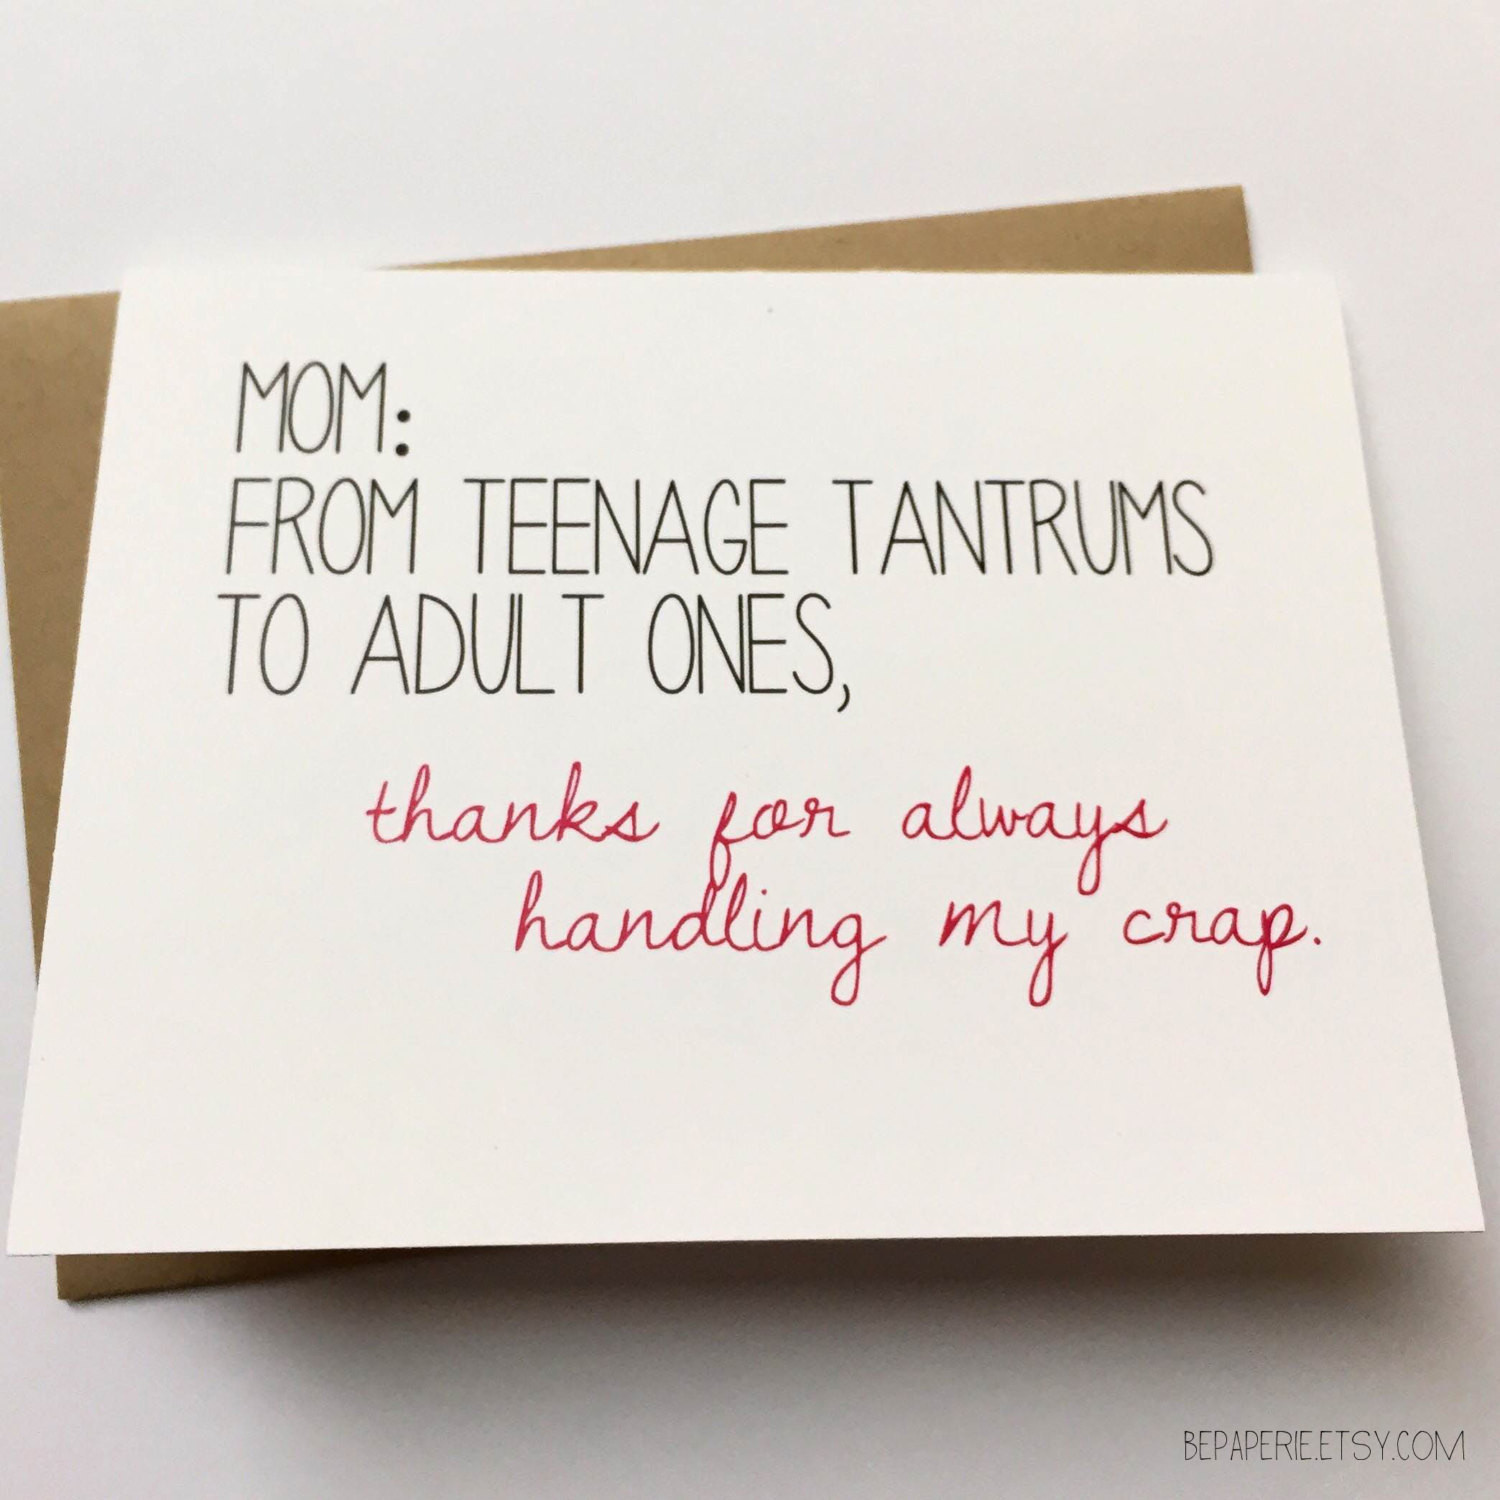 Funny Birthday Quotes Mom
 Mom Card Funny Card for Mom Mom Birthday Card Funny